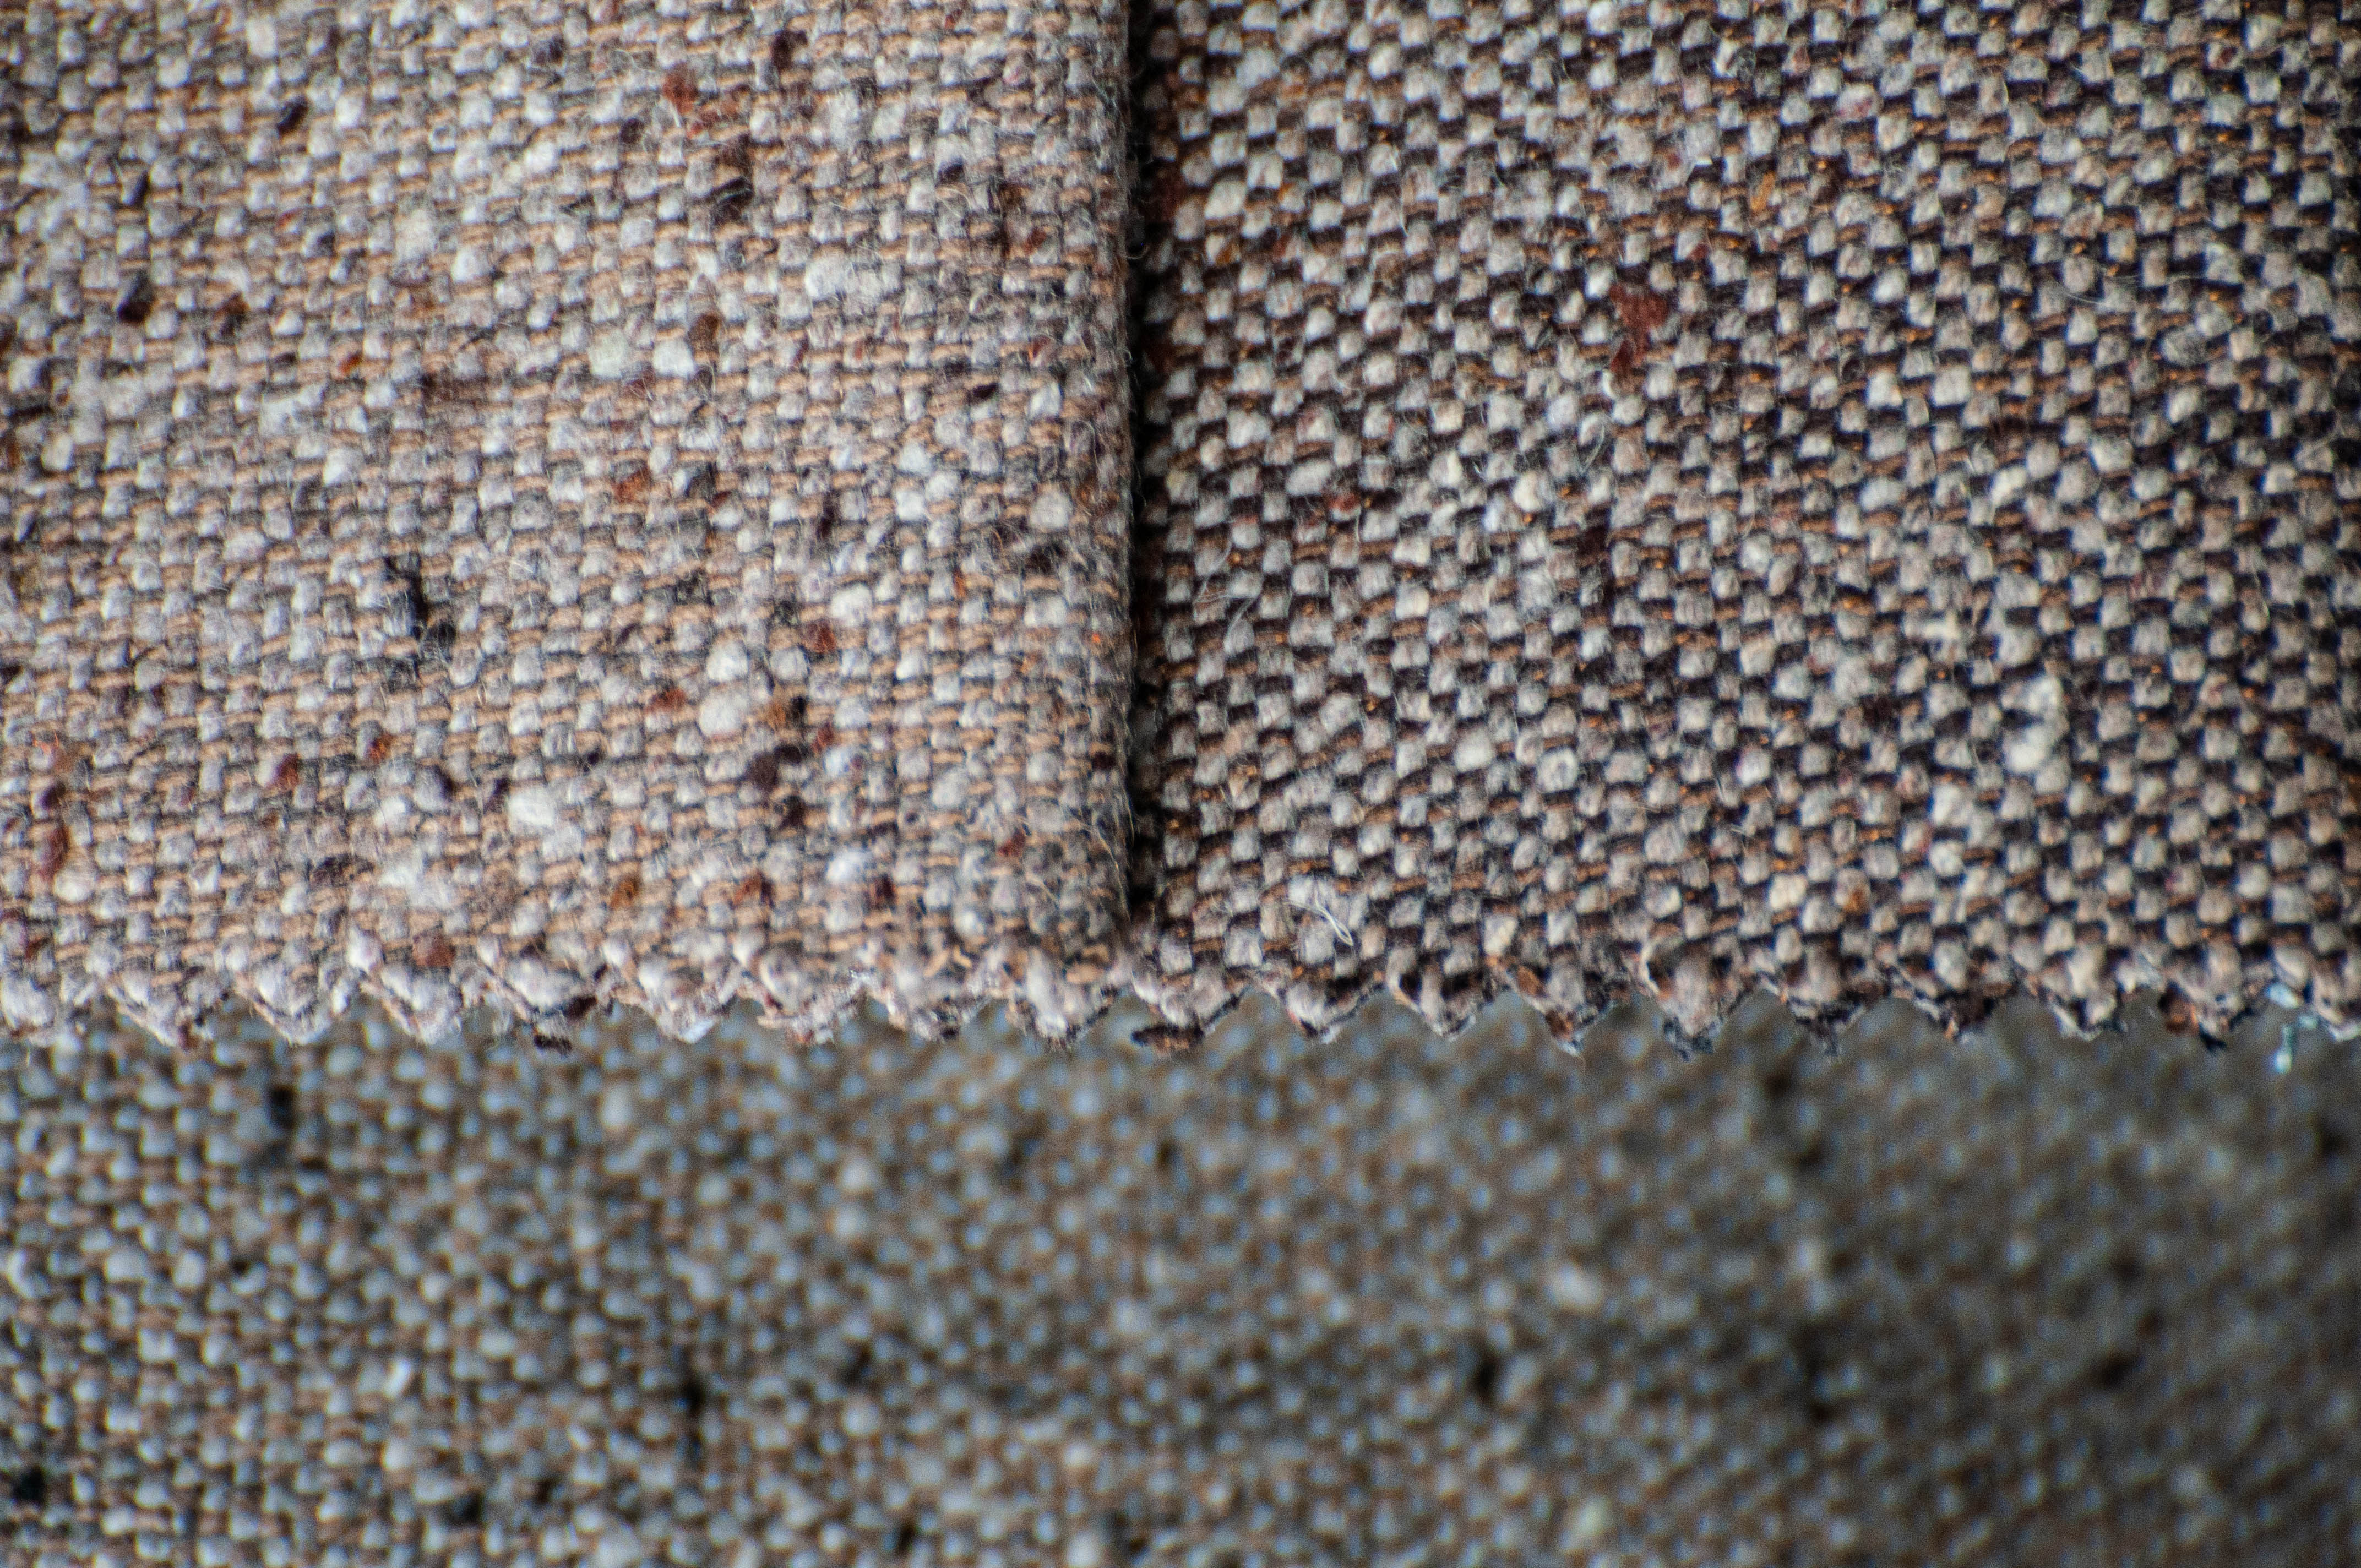 Upholstery fabric – types, characteristics and visual aesthetics   Upholstery fabric, Upholstery fabric for chairs, Furniture upholstery